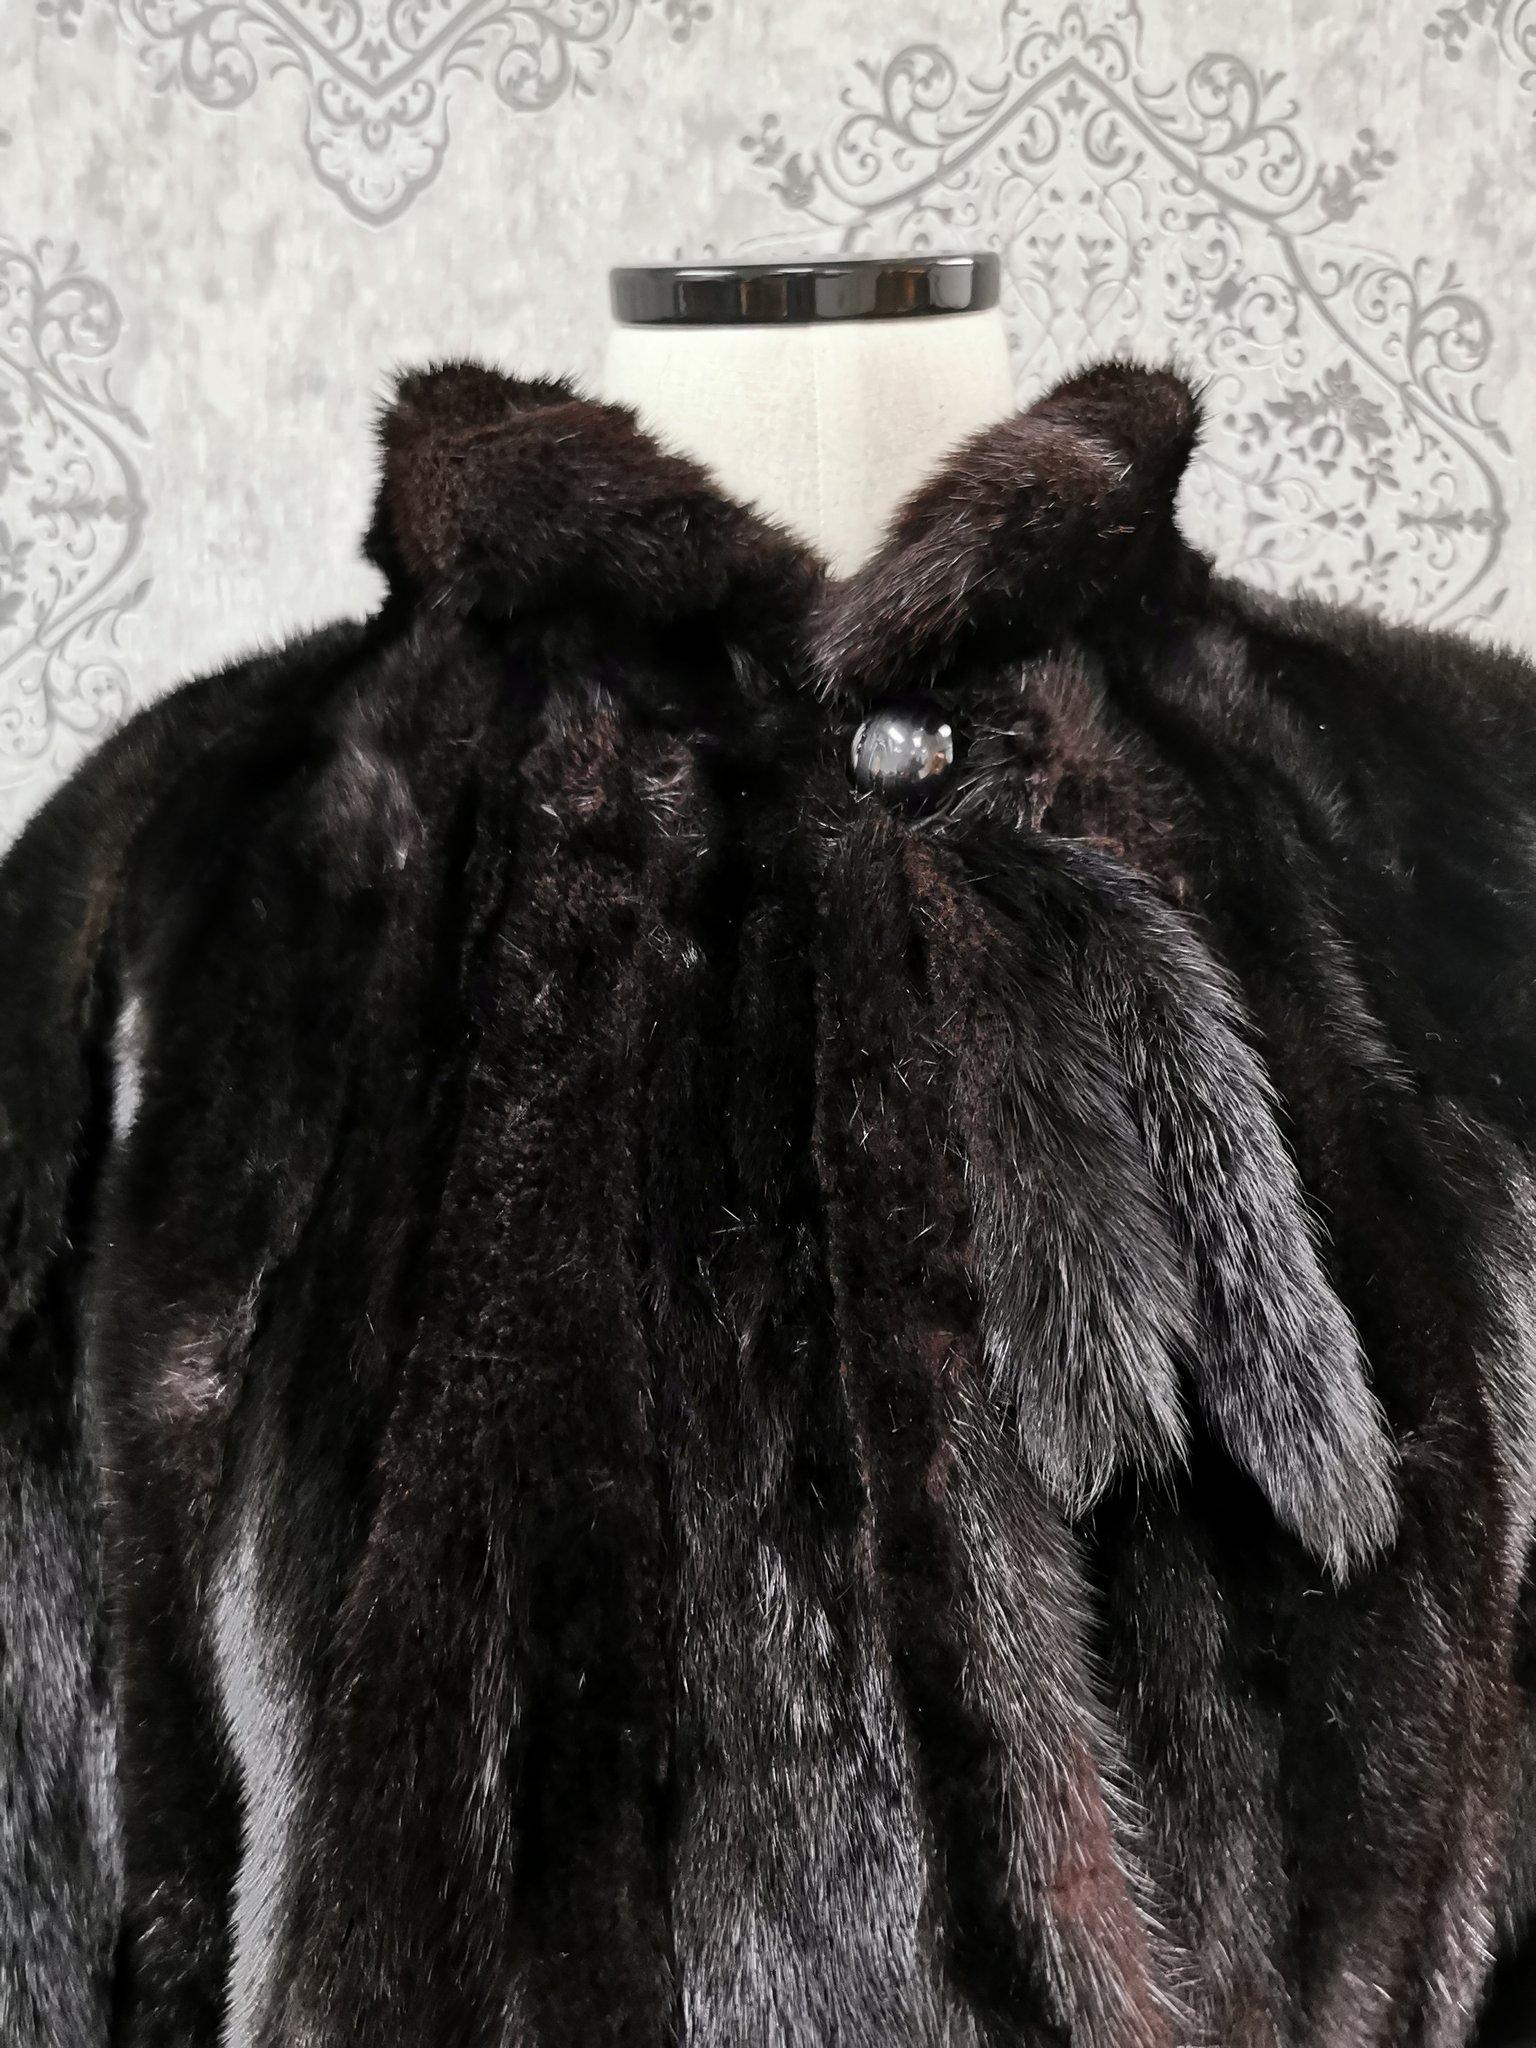 DESCRIPTION : 150 BRAND NEW BLACK MINK FUR COAT SIZE XL

tie collar bow, supple skins, beautiful fresh fur, european german clasps for closure, too slit pockets, nice big full pelts skins in excellent condition.

This item is made in Canada with the